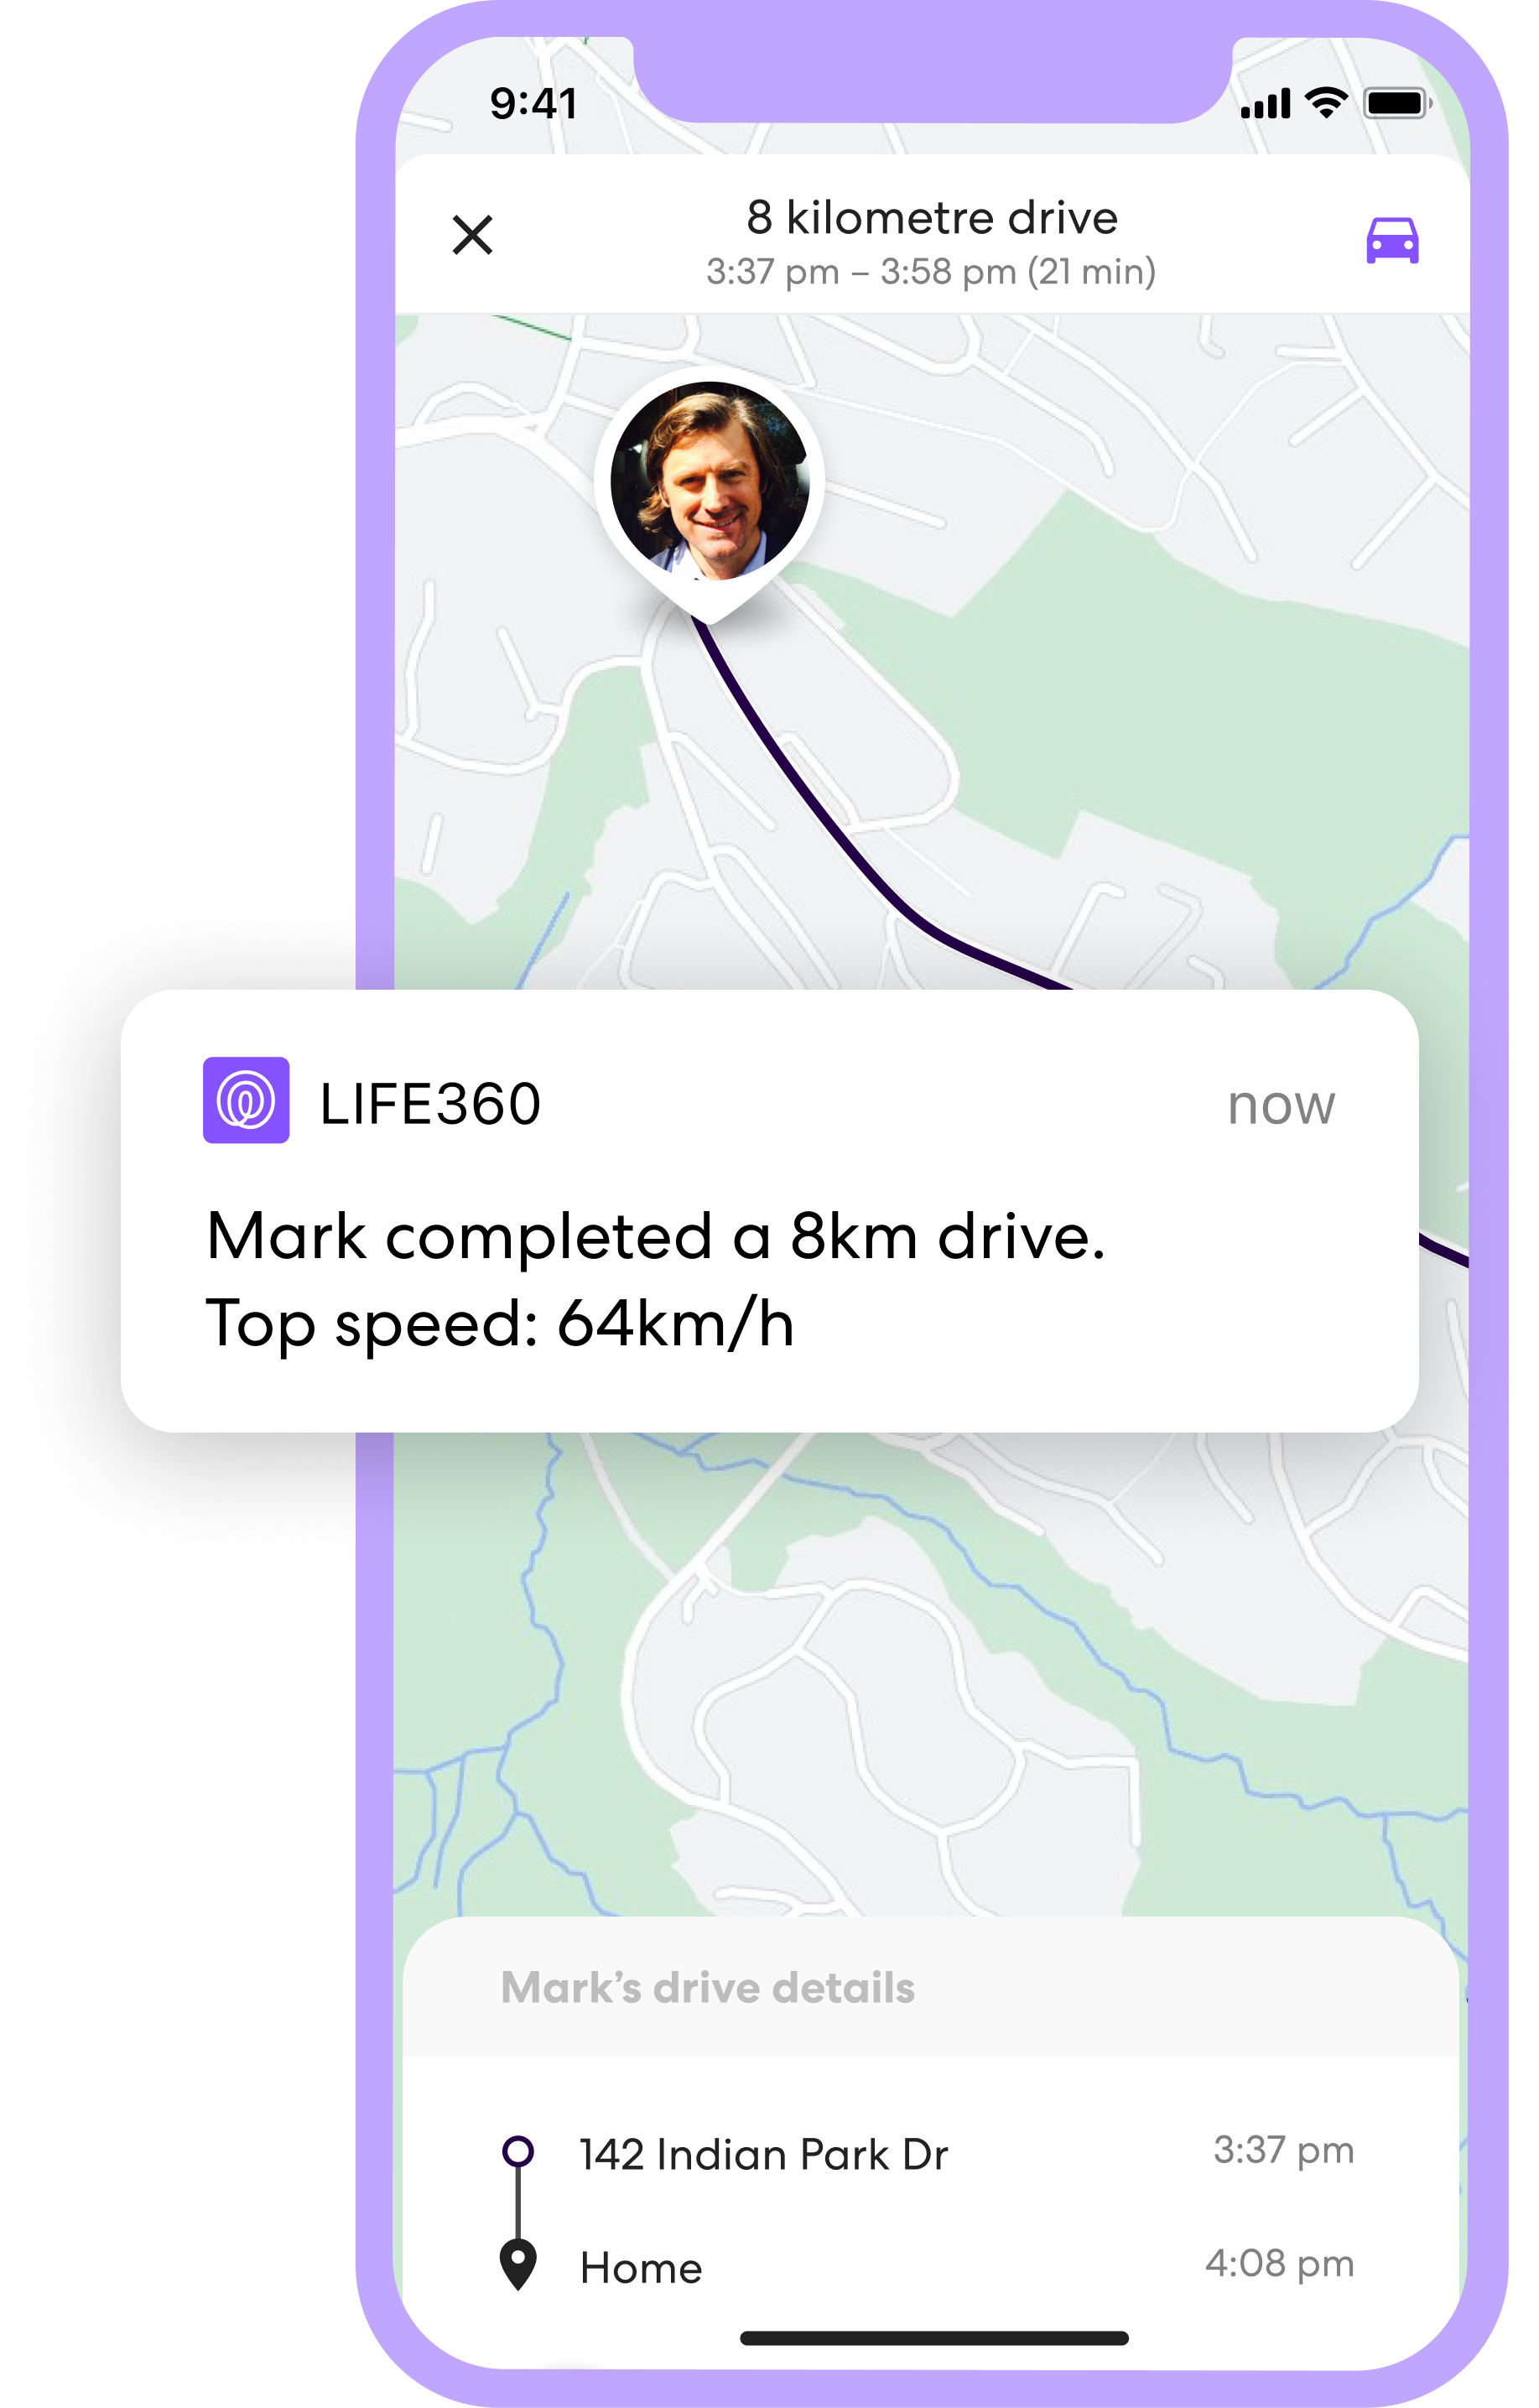 Life360 app screen, showing a map with a push notification